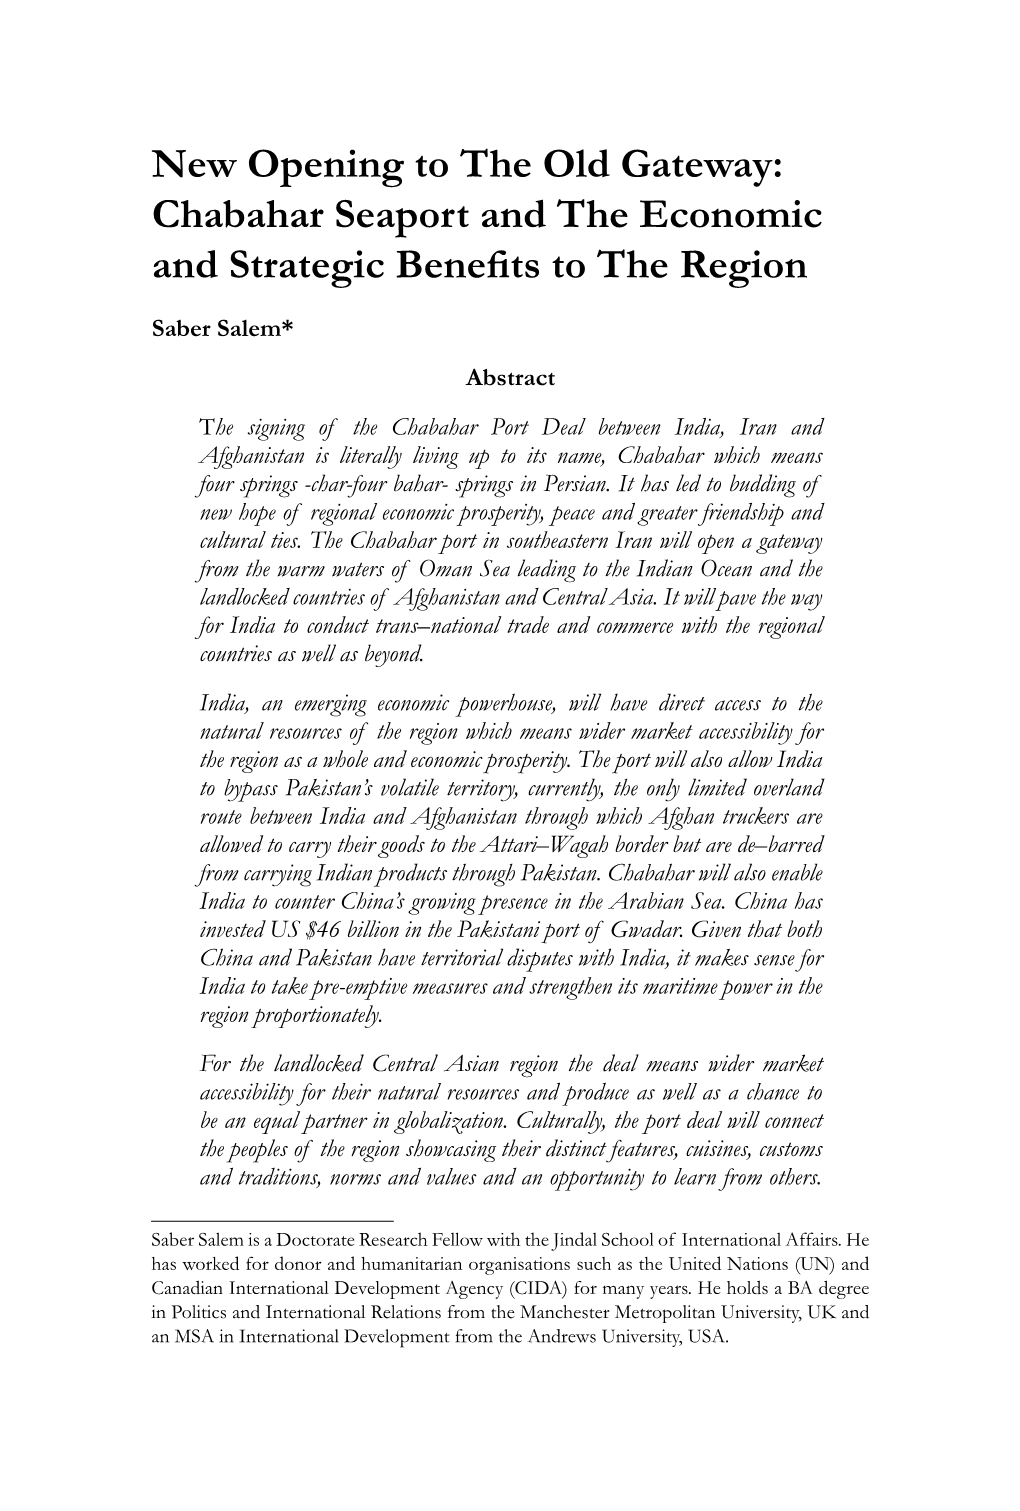 Chabahar Seaport and the Economic and Strategic Benefits to the Region